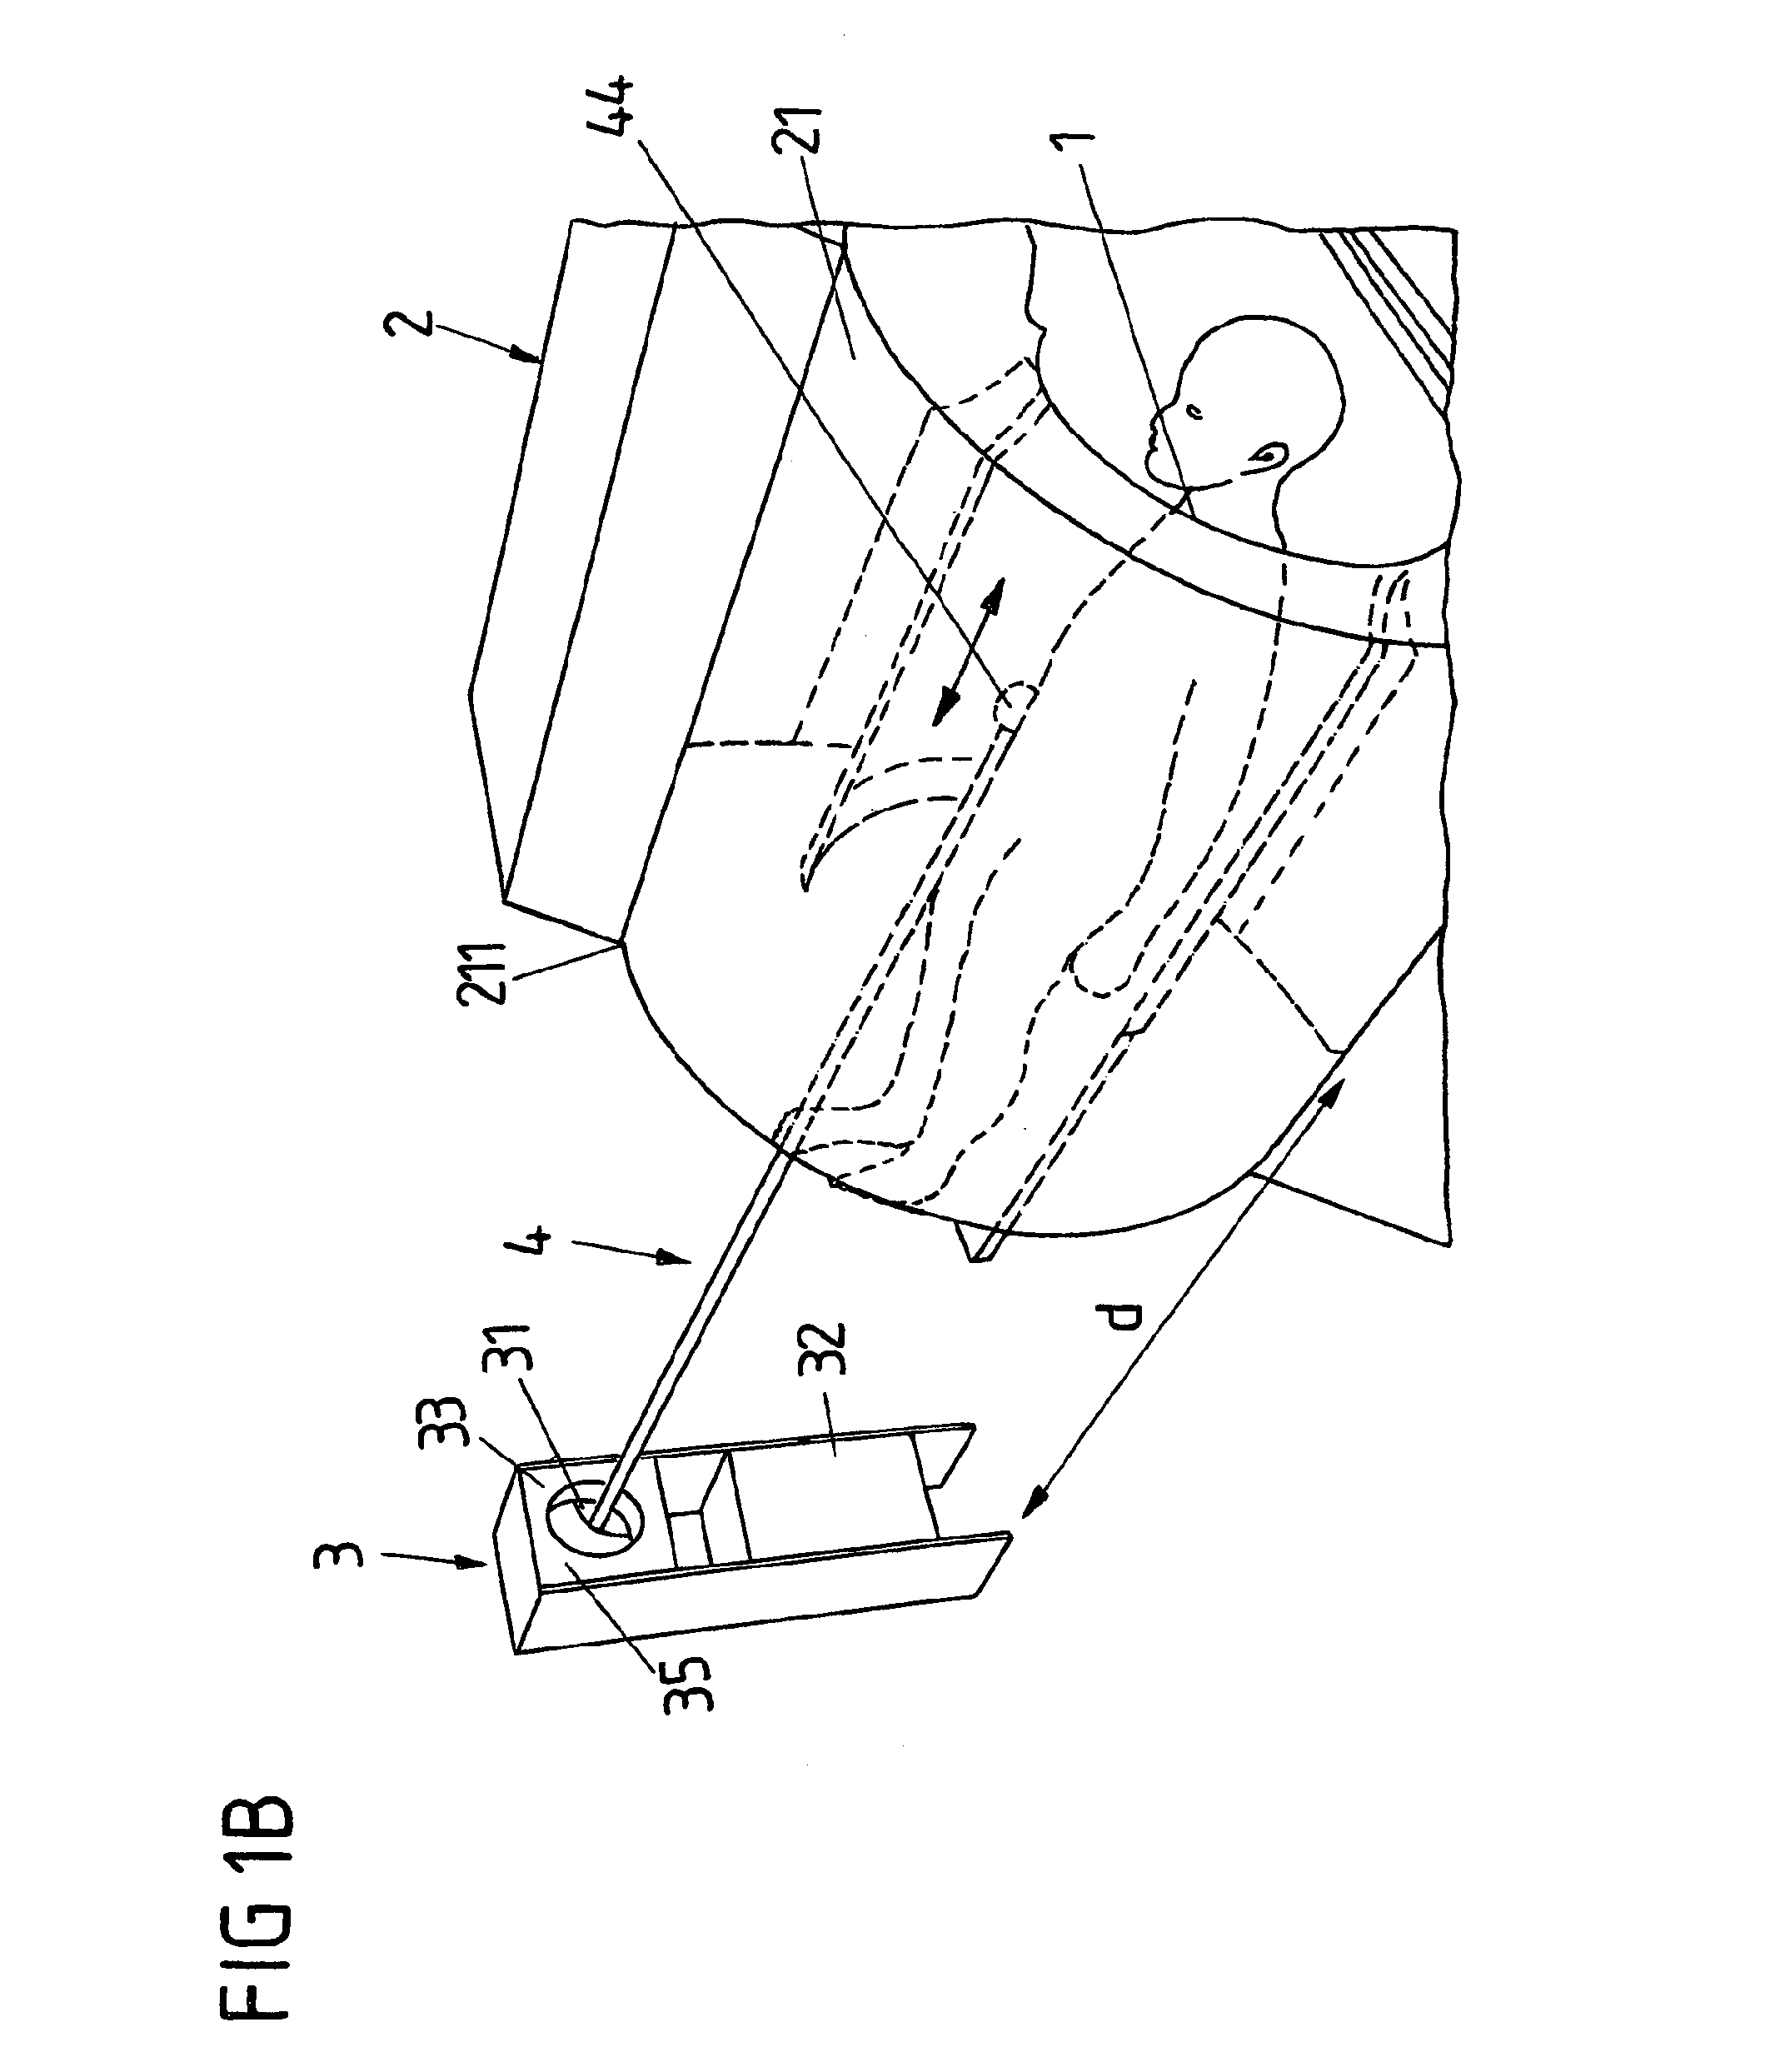 Device and method for generating mechanical oscillations in an examination object using magnetic resonance elastography